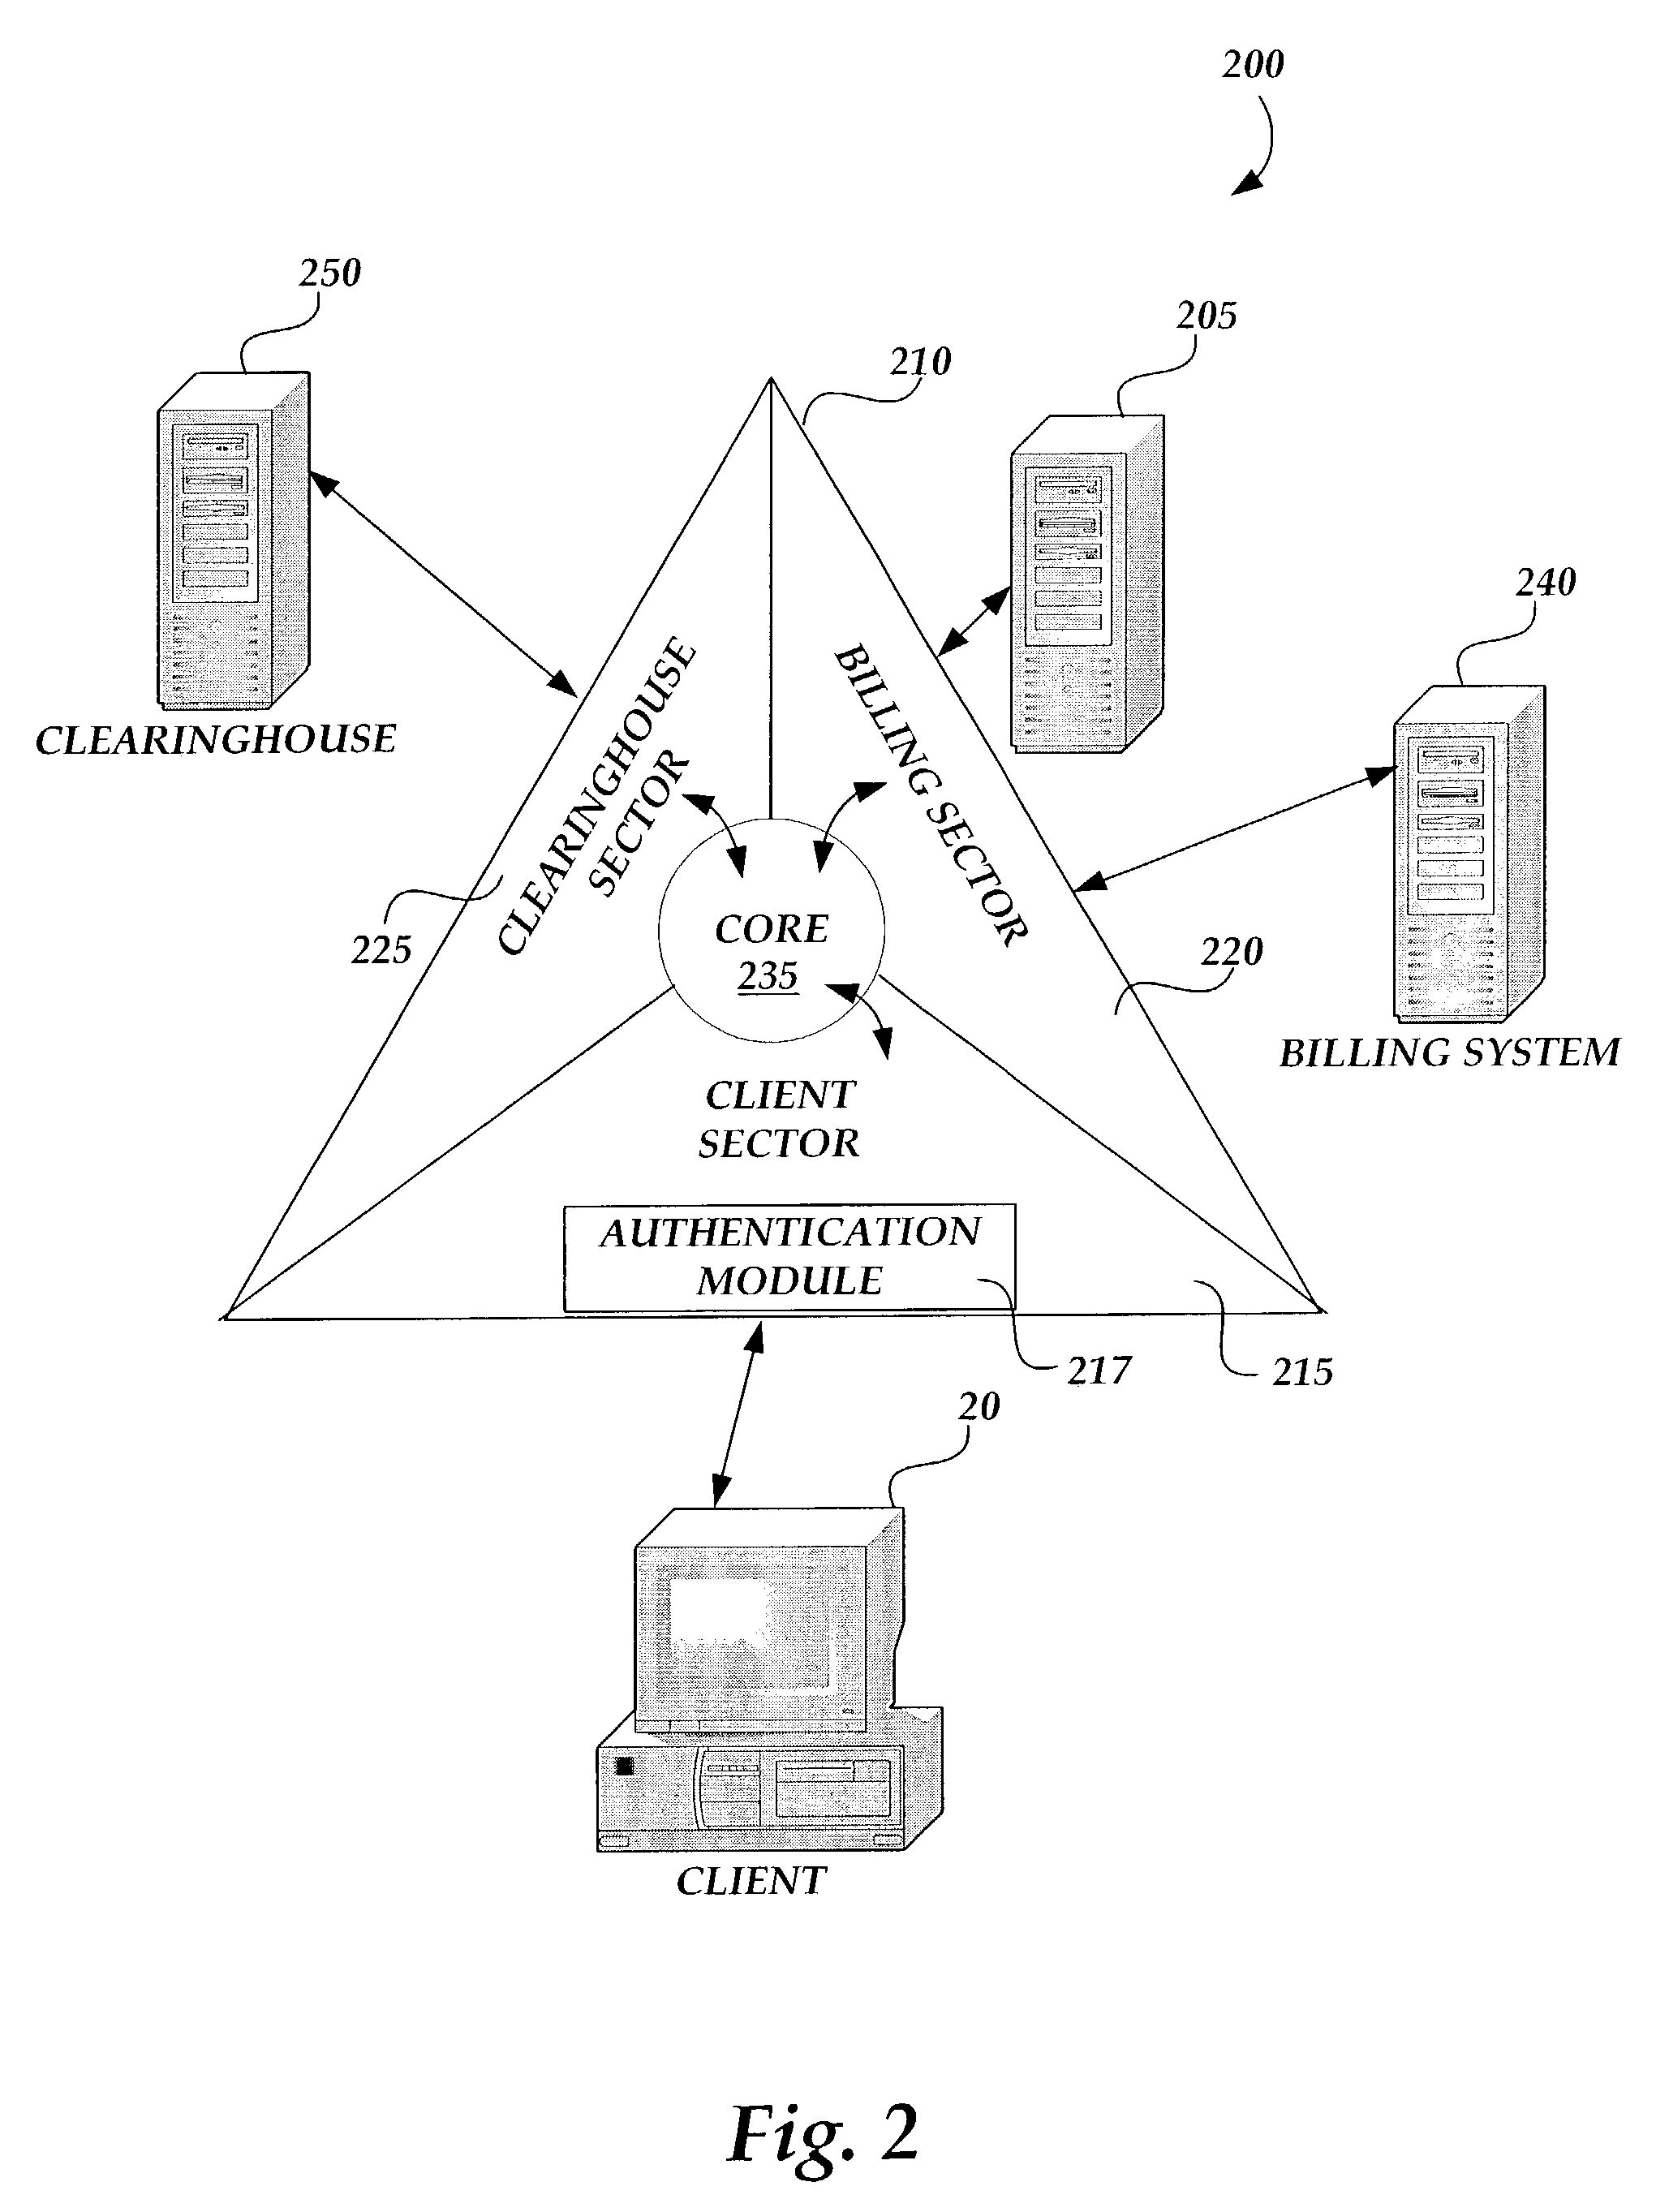 Computer software and services license processing method and system